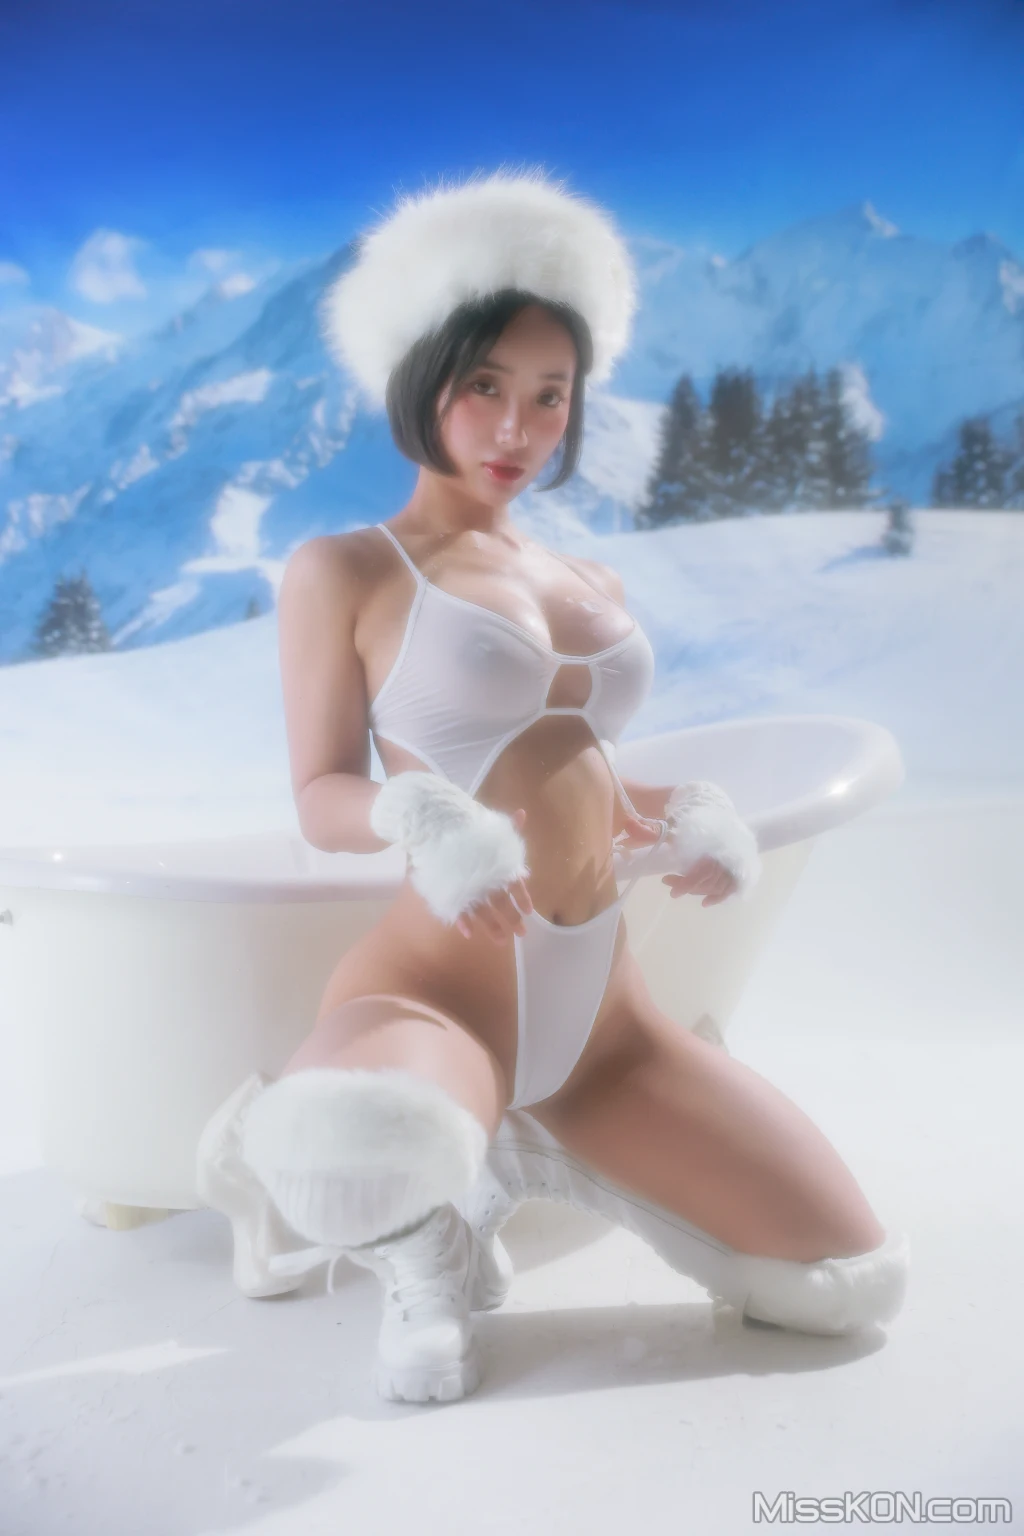 [Pinkpie] Booty Queen Vol.1: The Hot Body of a Lost Girl in Snow Garden (50 图 + 1 视频) –插图1